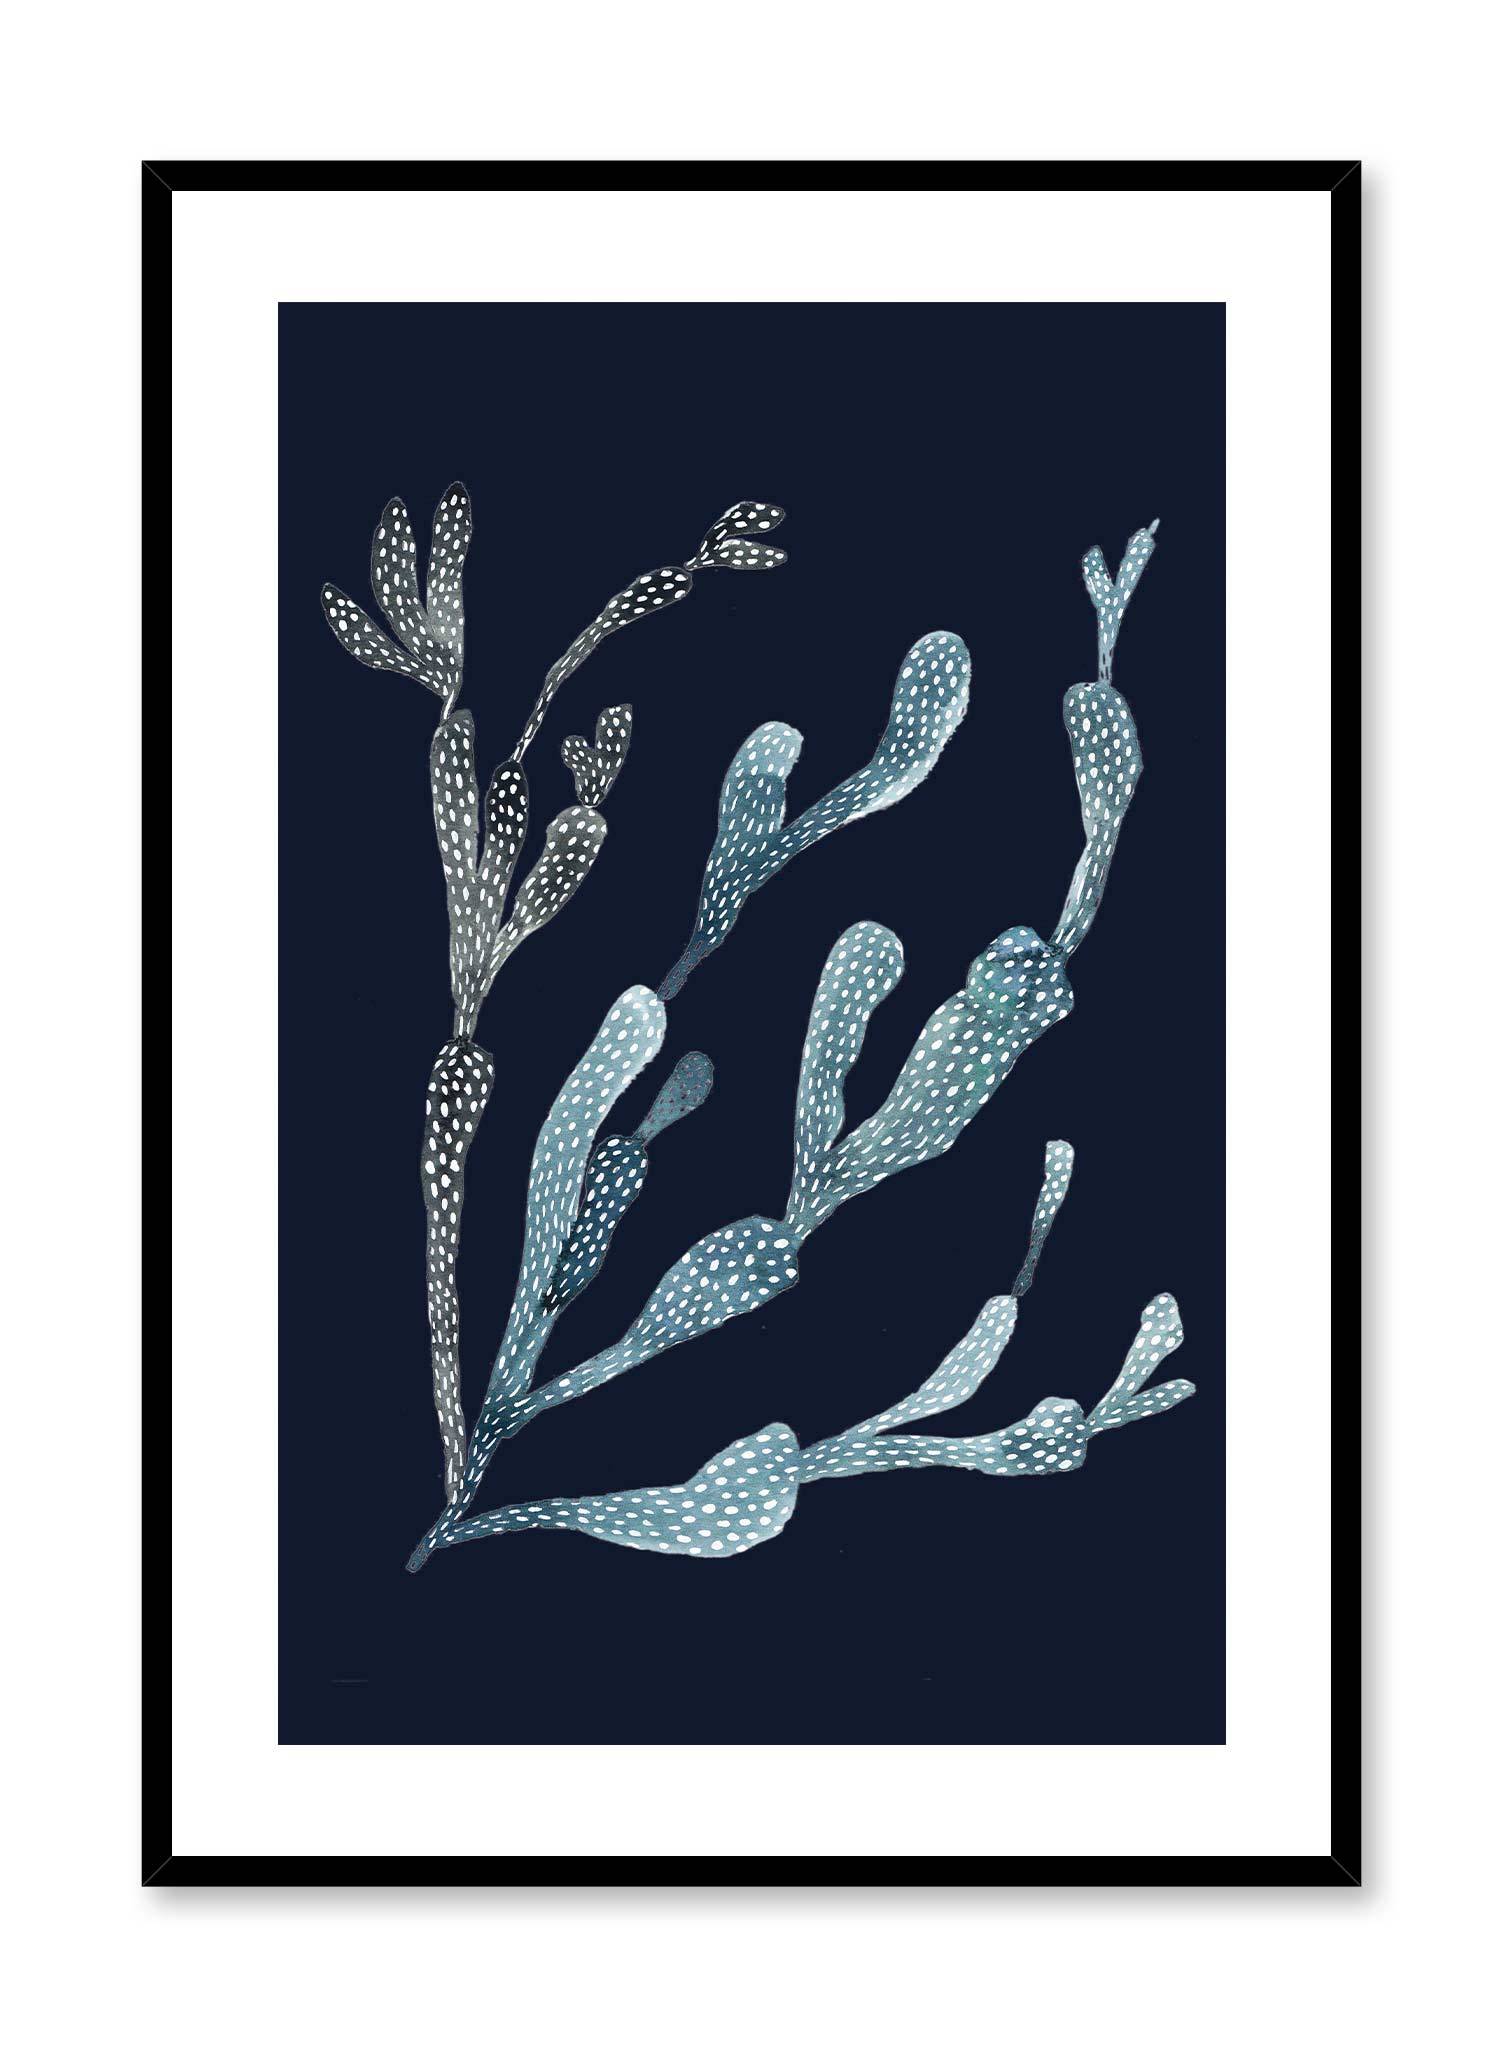 Navy Coral is a minimalist illustration of a slightly slanted underwater neon branch of coral by Opposite Wall.